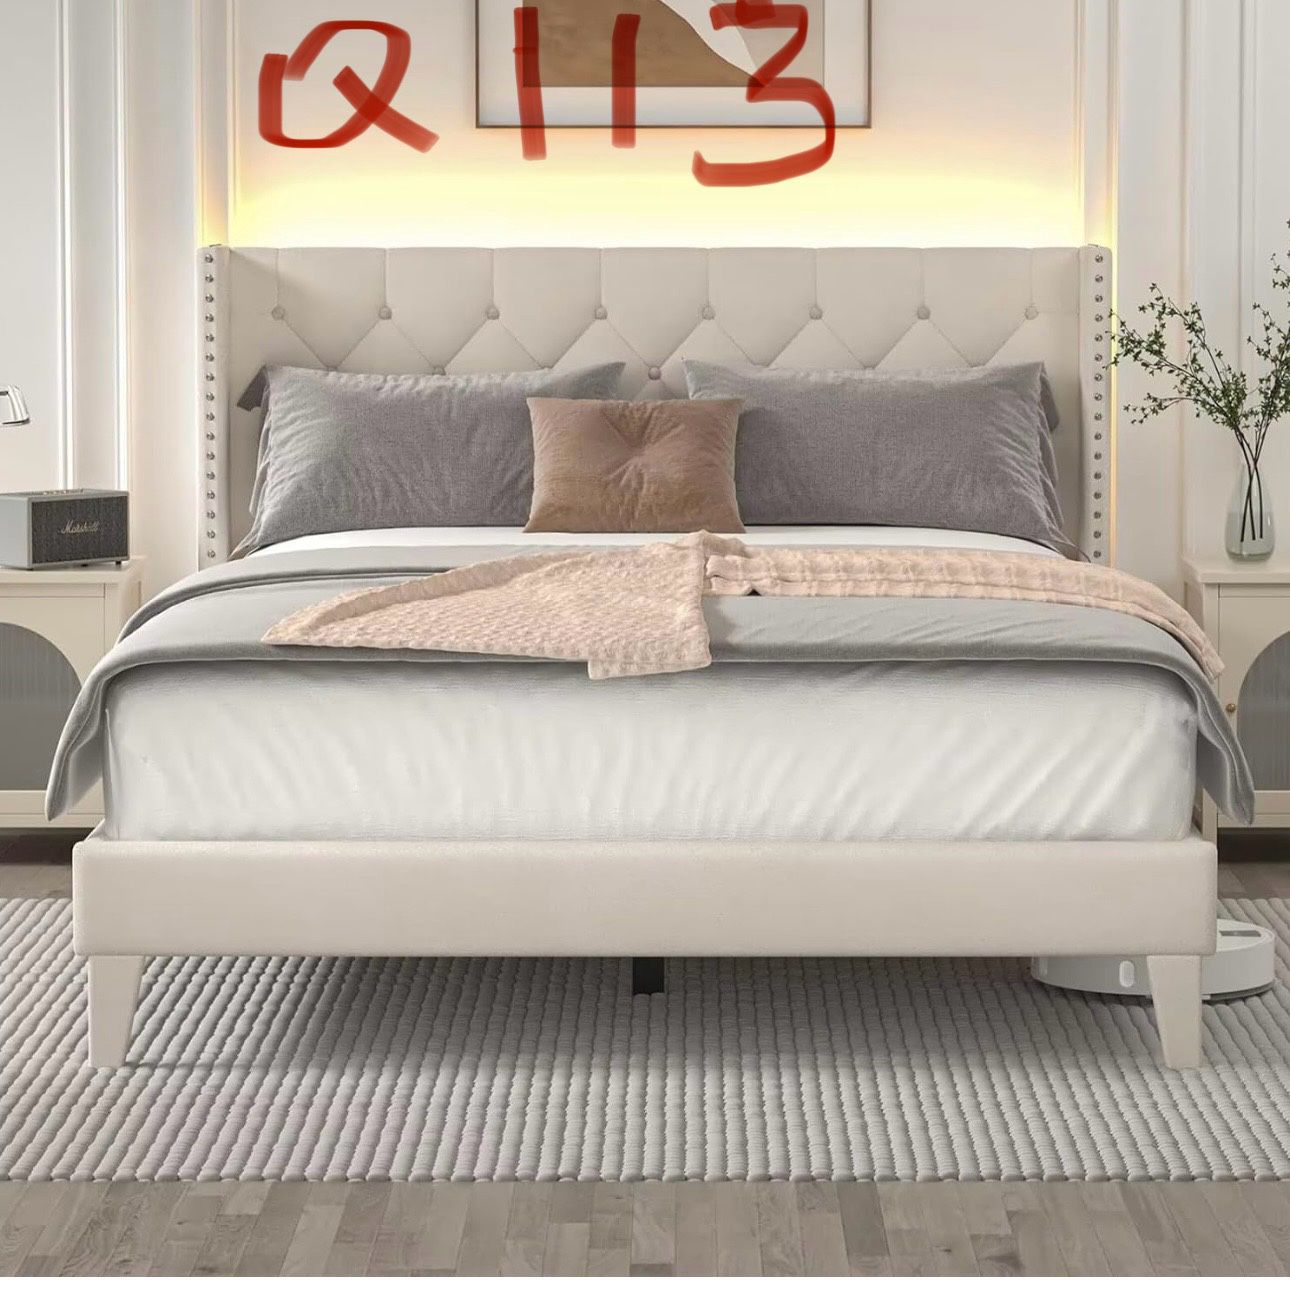 Q113 queen size bed frame 